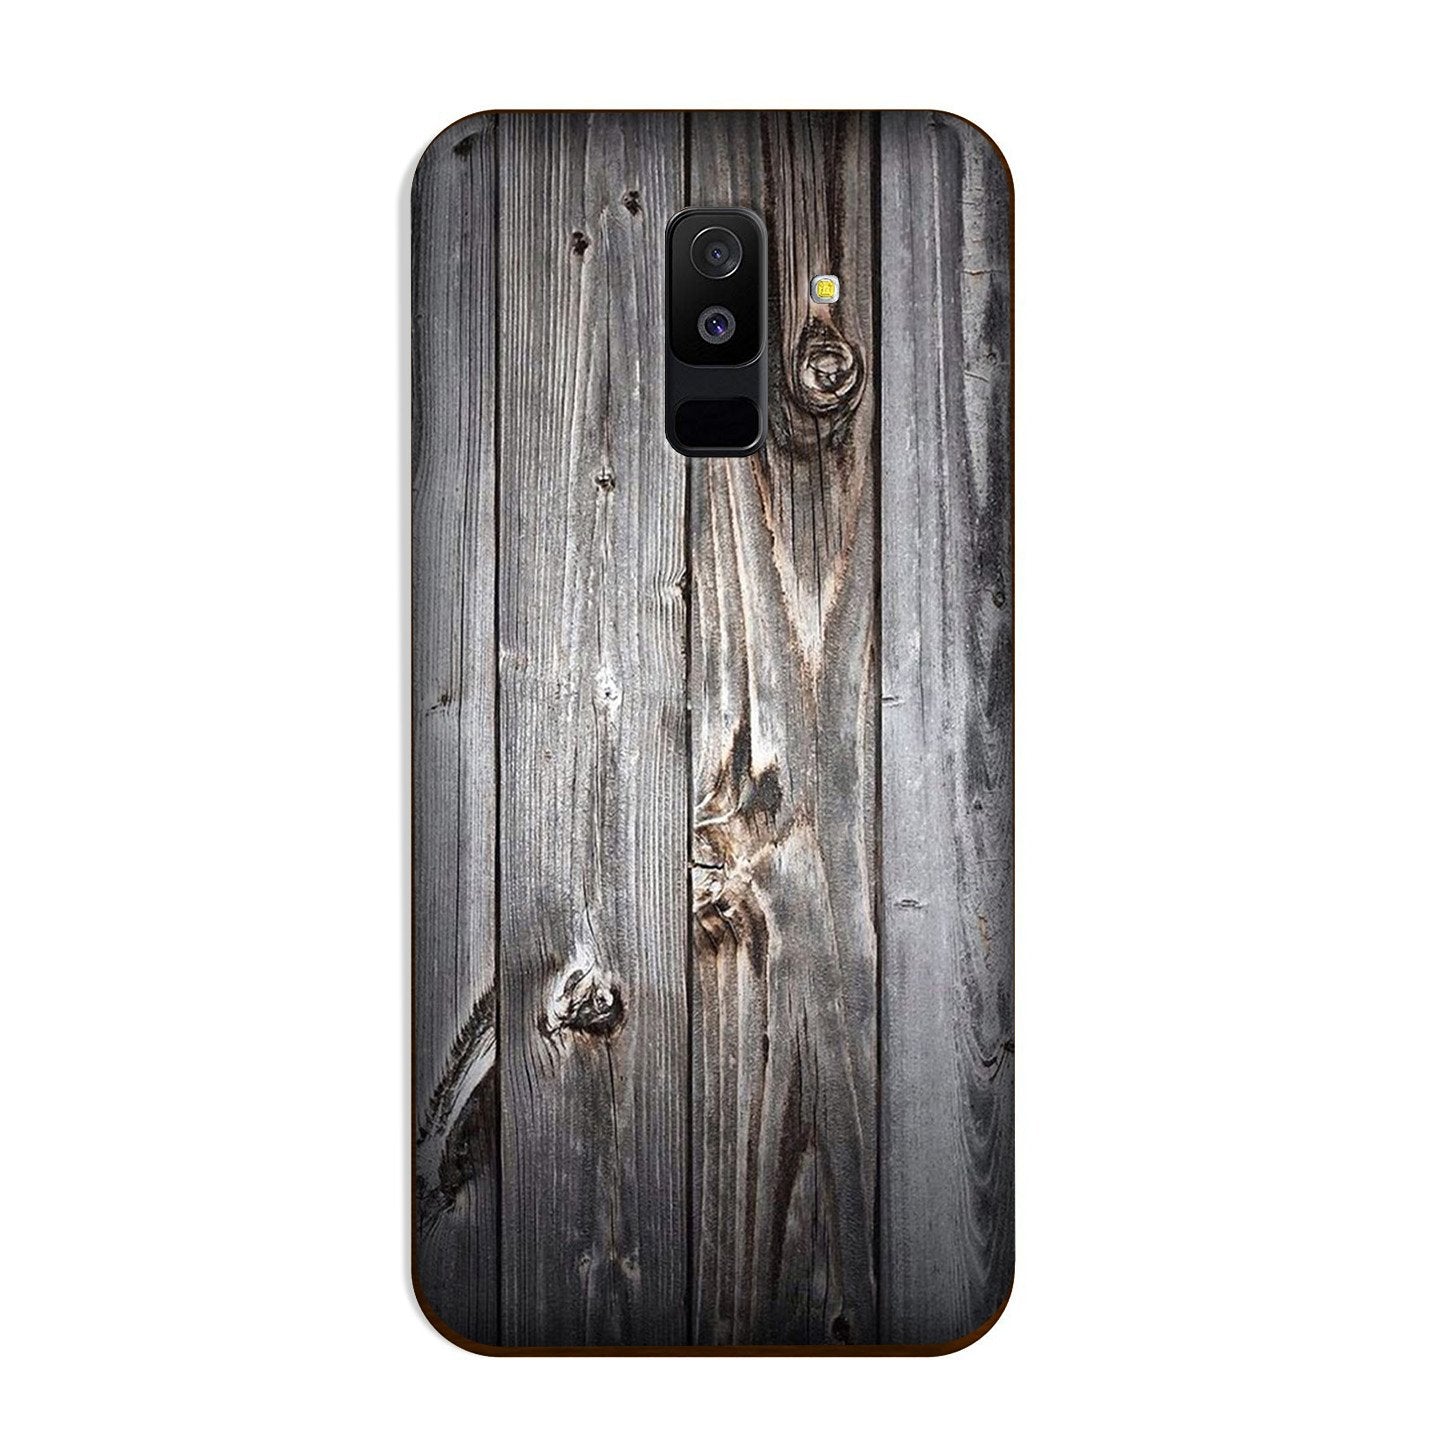 Wooden Look Case for Galaxy J8(Design - 114)